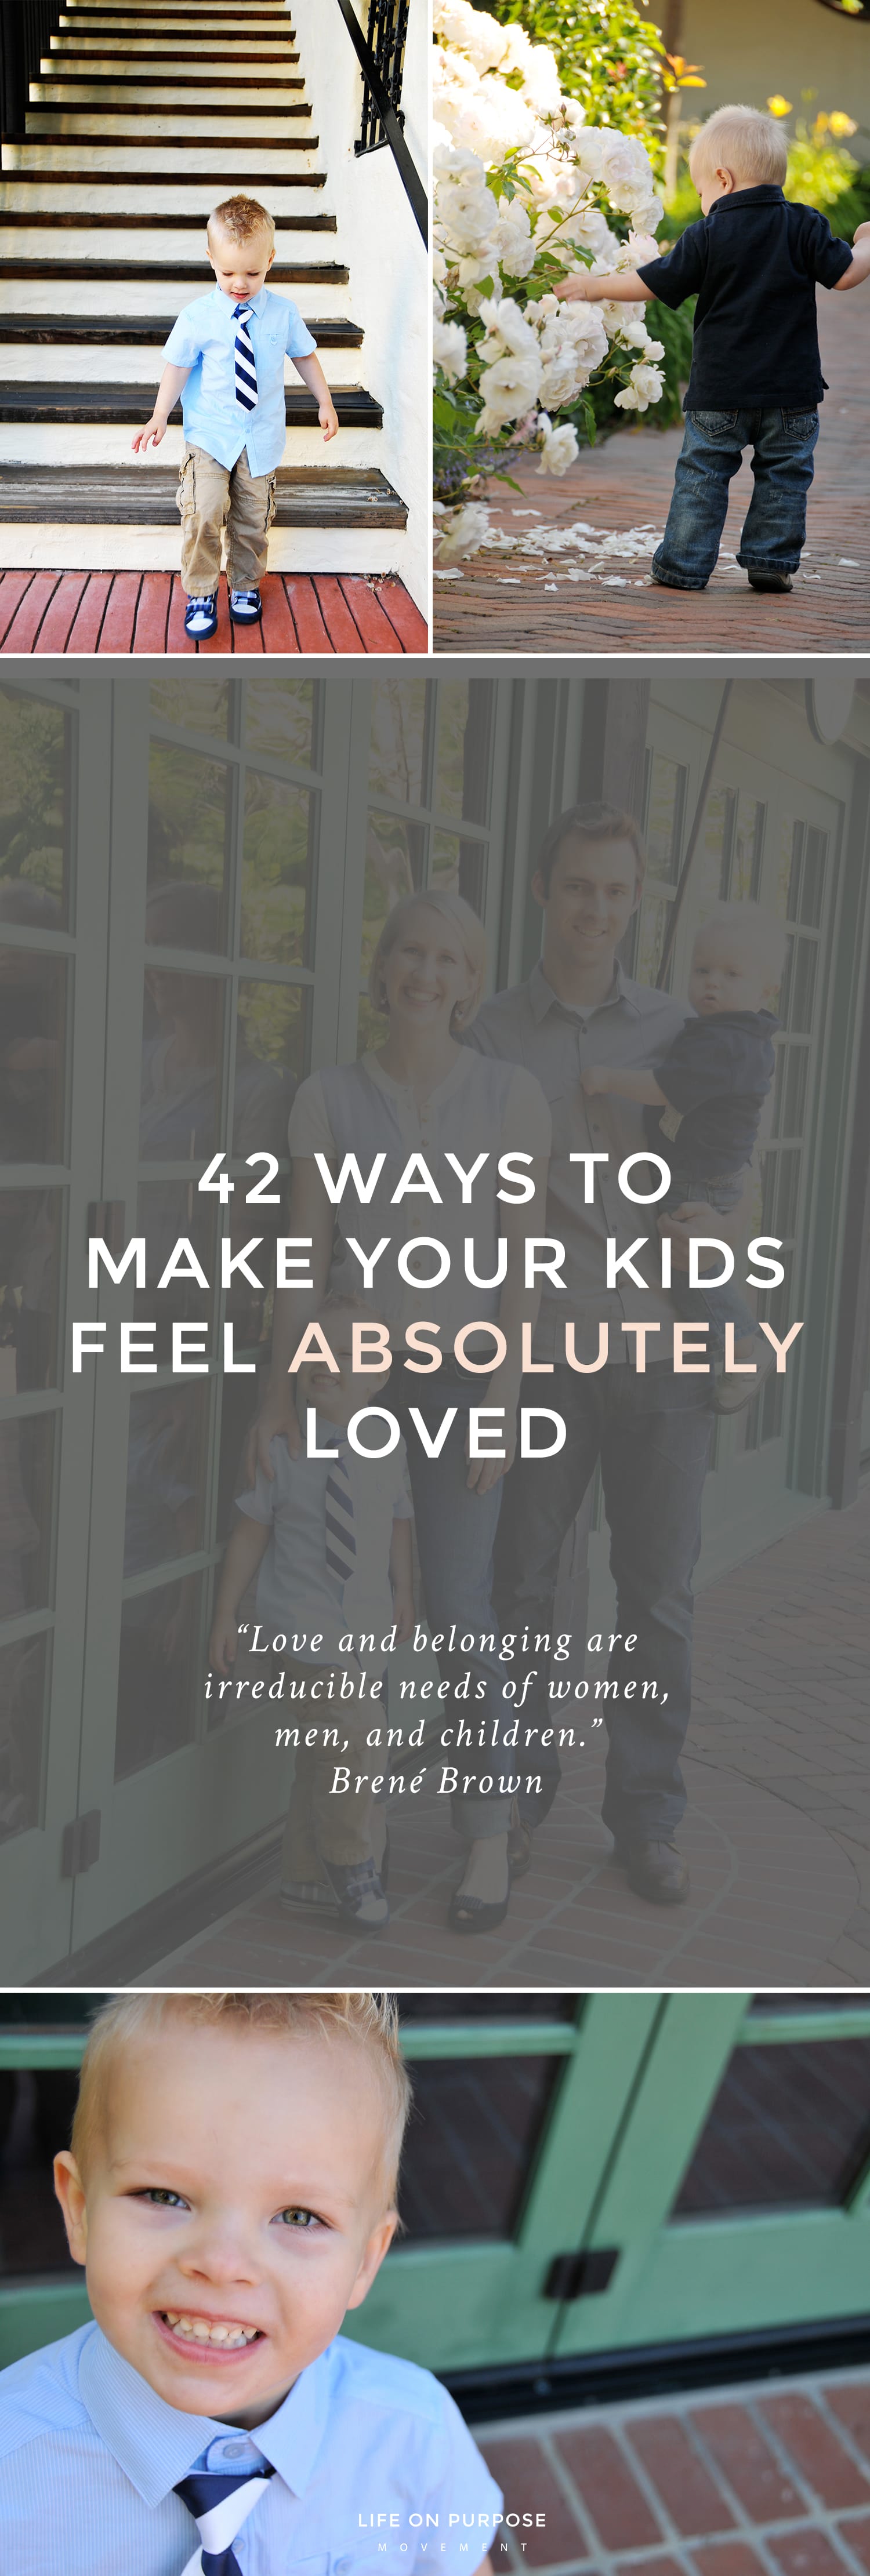 42 Ways to Make Your Kids Feel Absolutely Loved